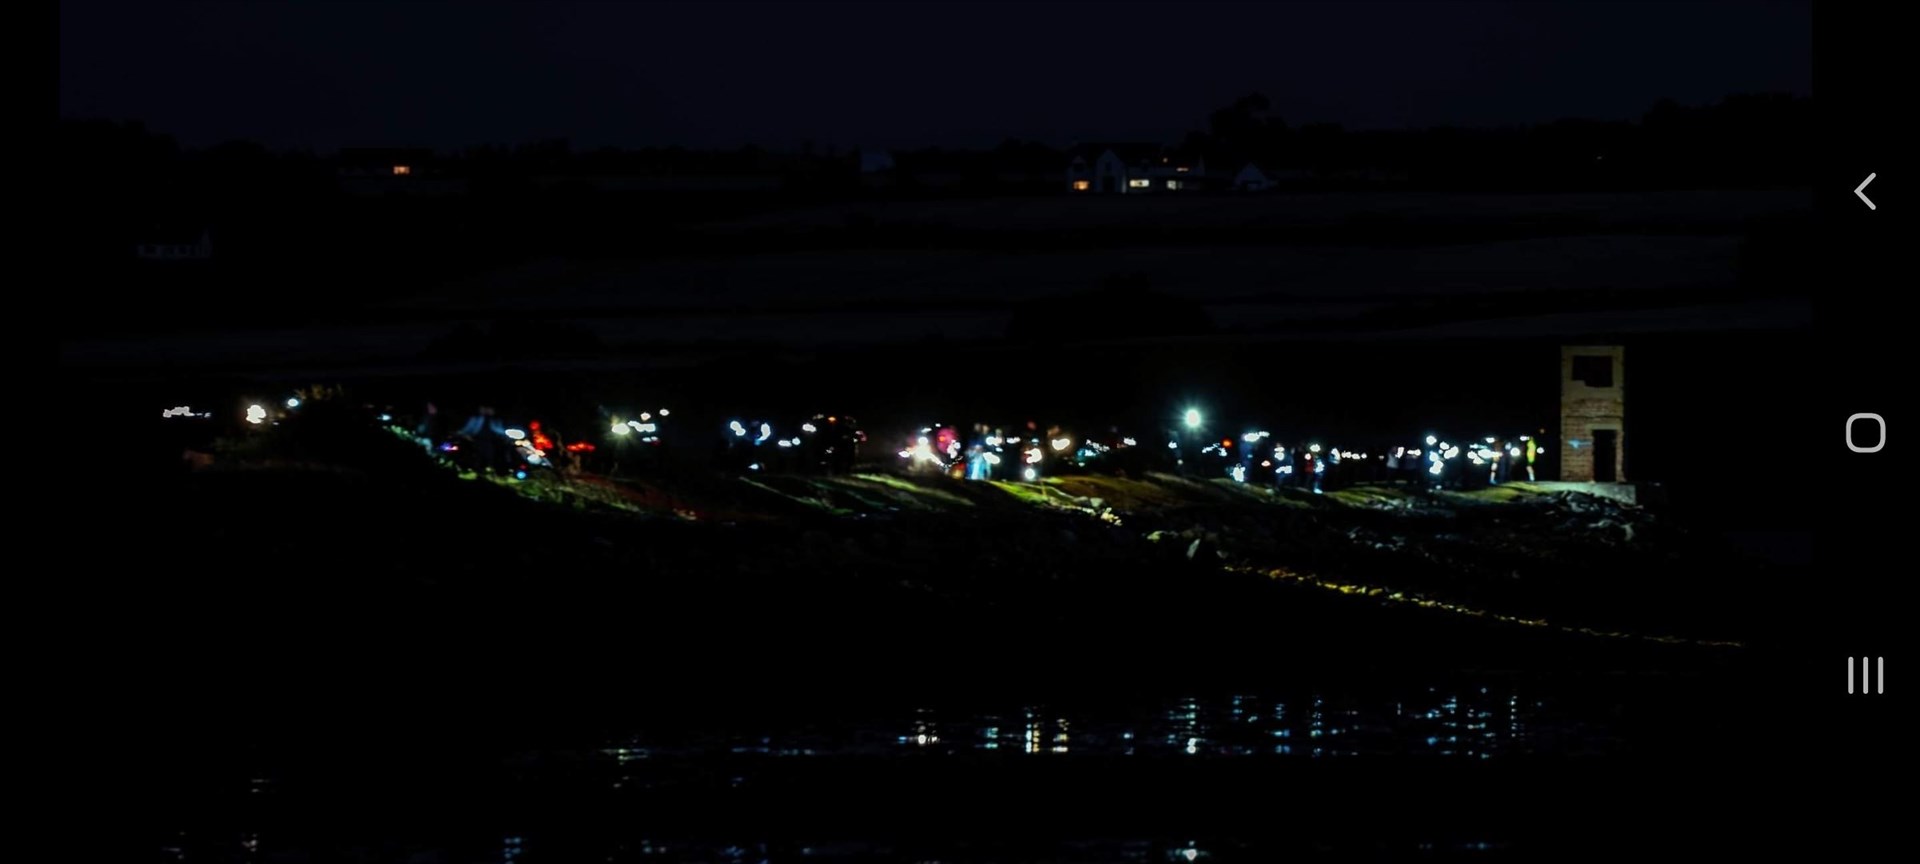 Lights of hope in the dark: The Alness event at the Yankee pier attracted a great turnout. Picture: Paul Morley